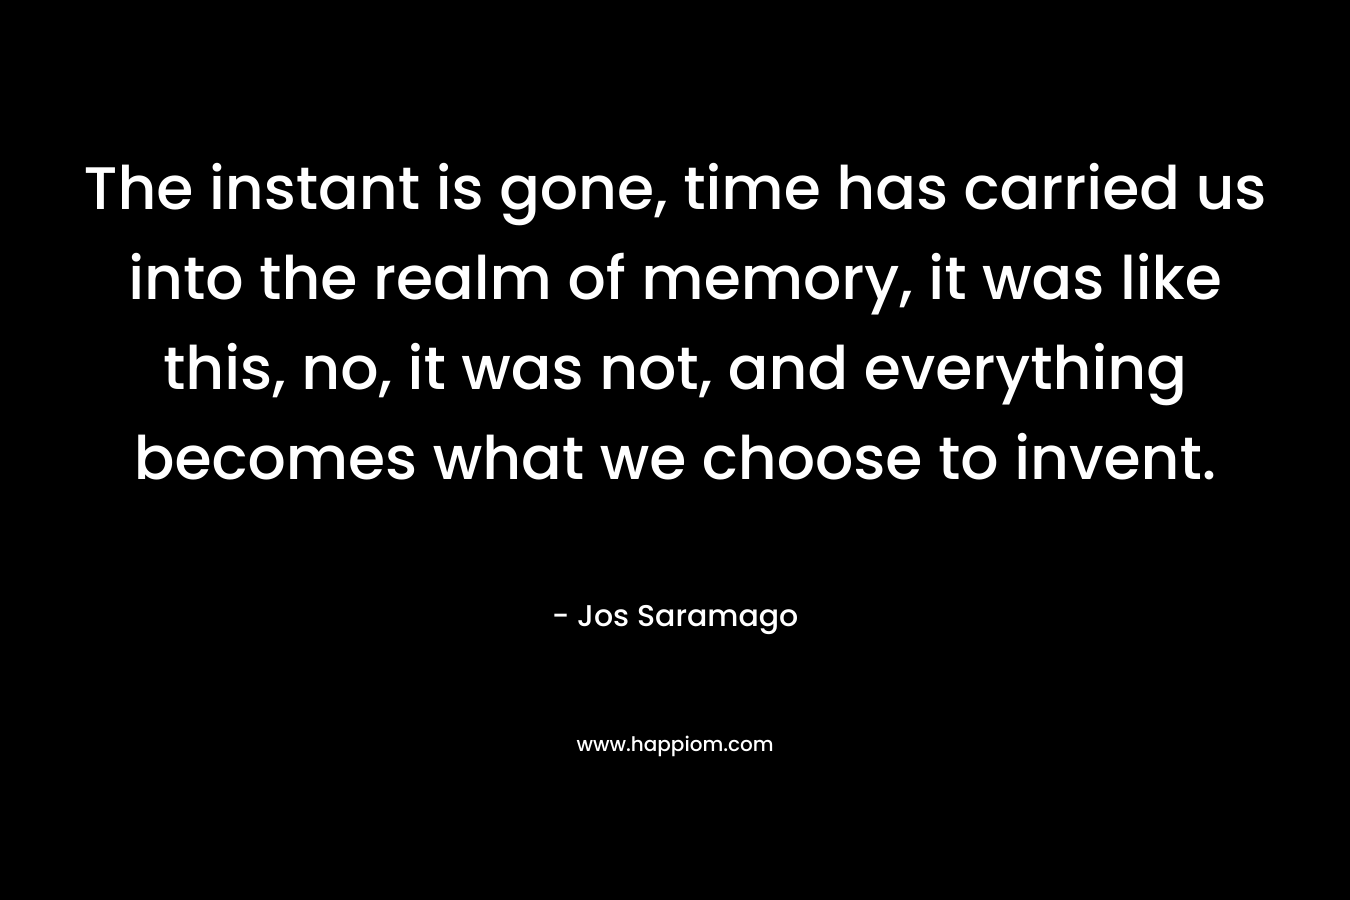 The instant is gone, time has carried us into the realm of memory, it was like this, no, it was not, and everything becomes what we choose to invent.